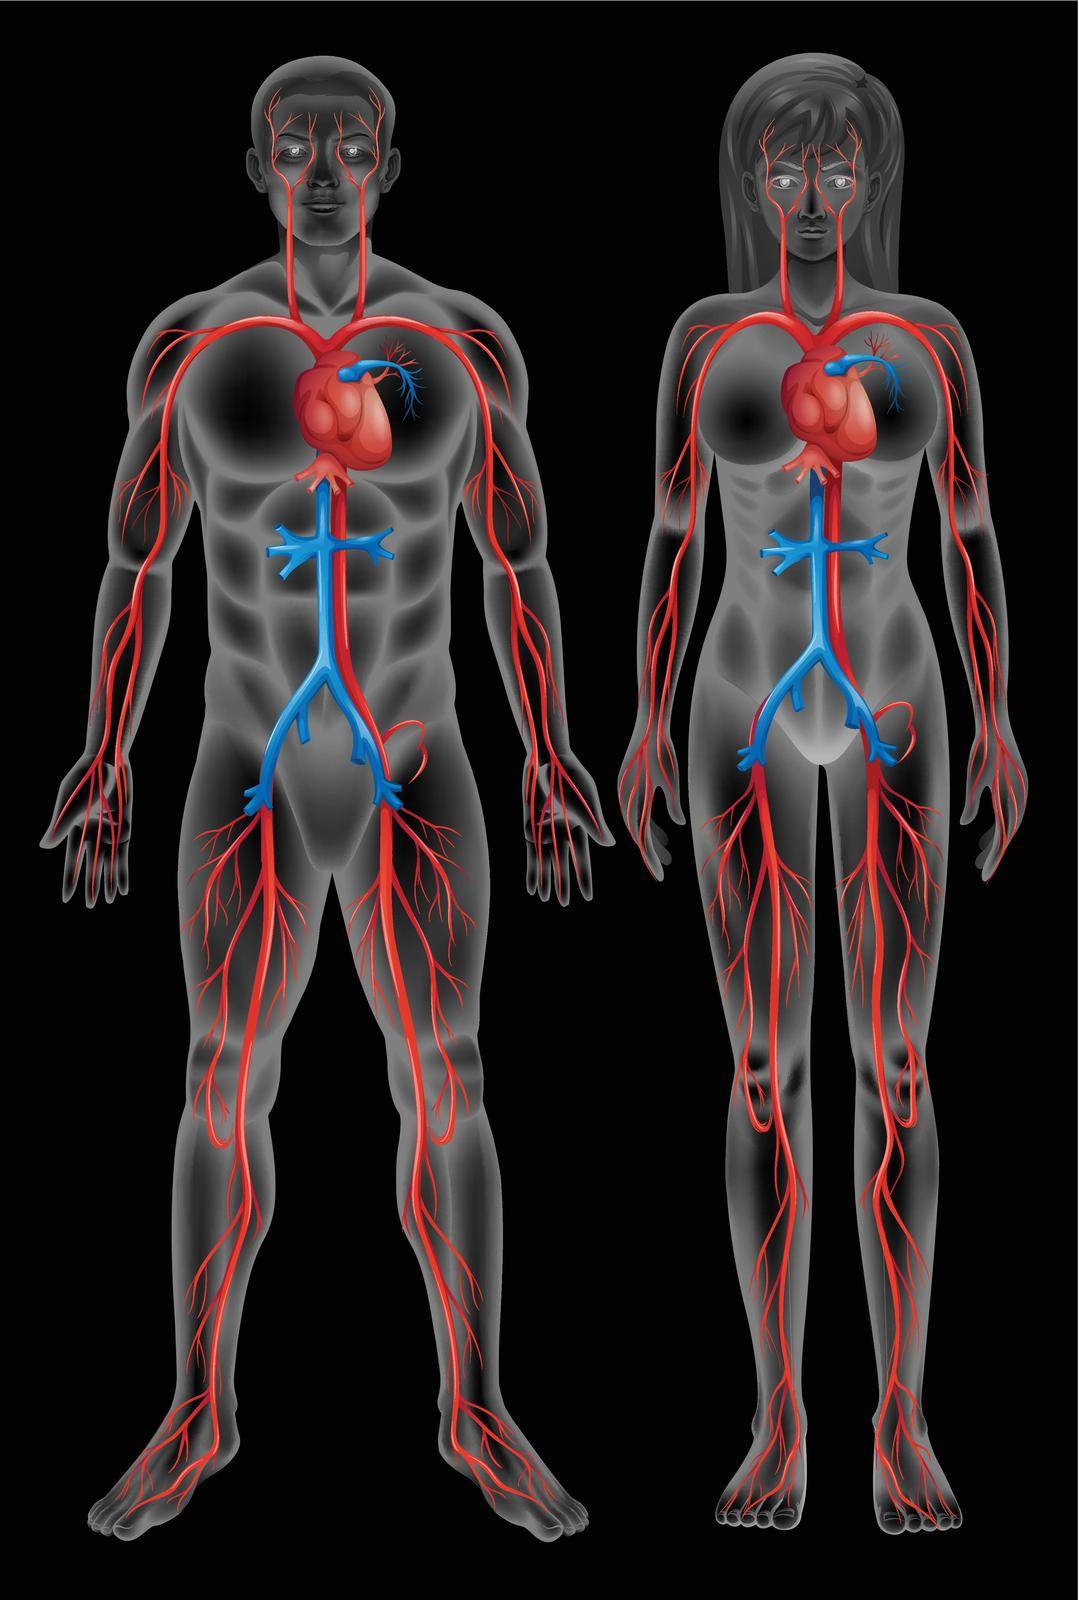 Circulatory system of a male and a female on a black background